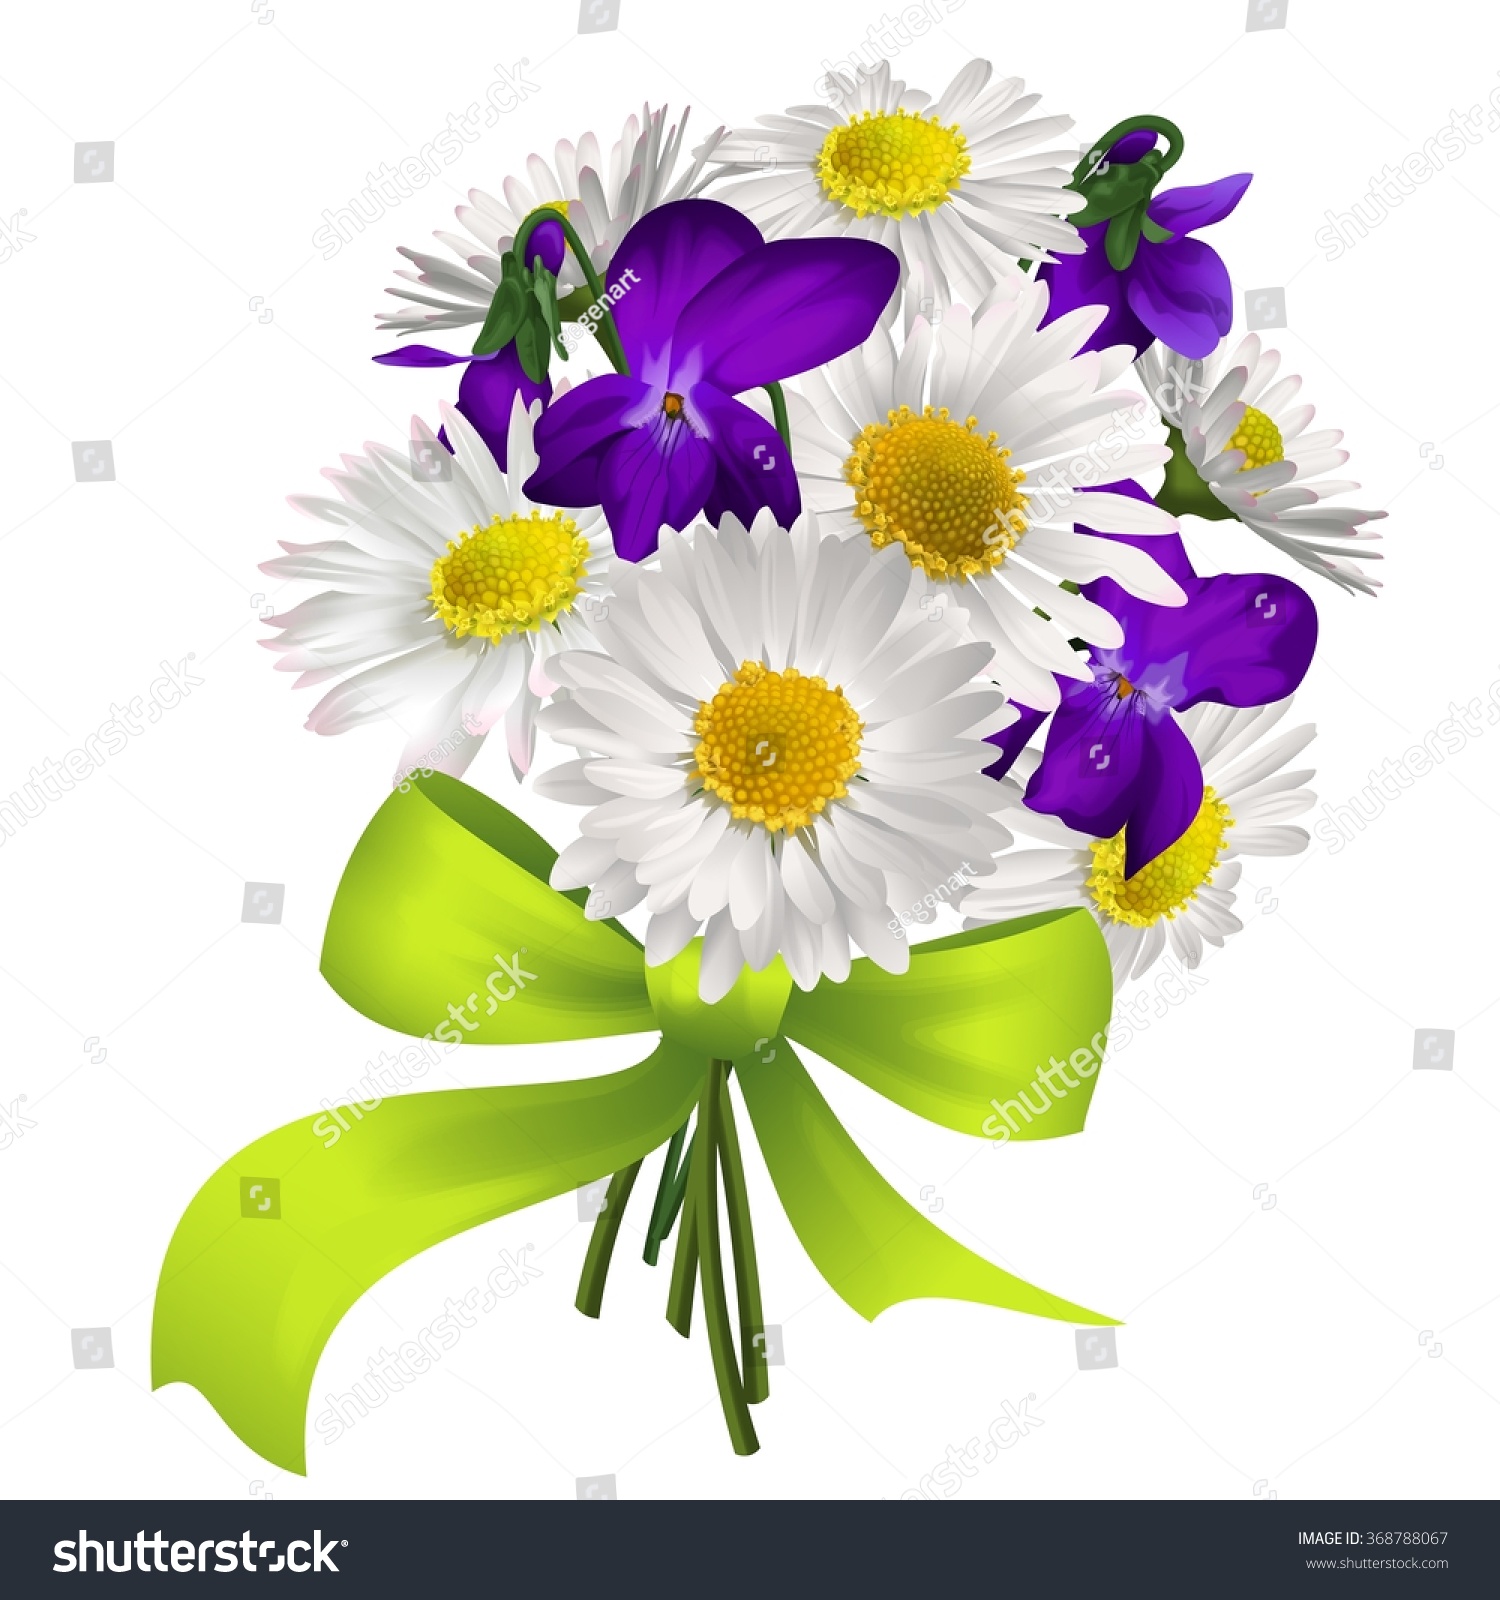 Spring Flowers Bunch Daisies Violets Green Stock Illustration ...